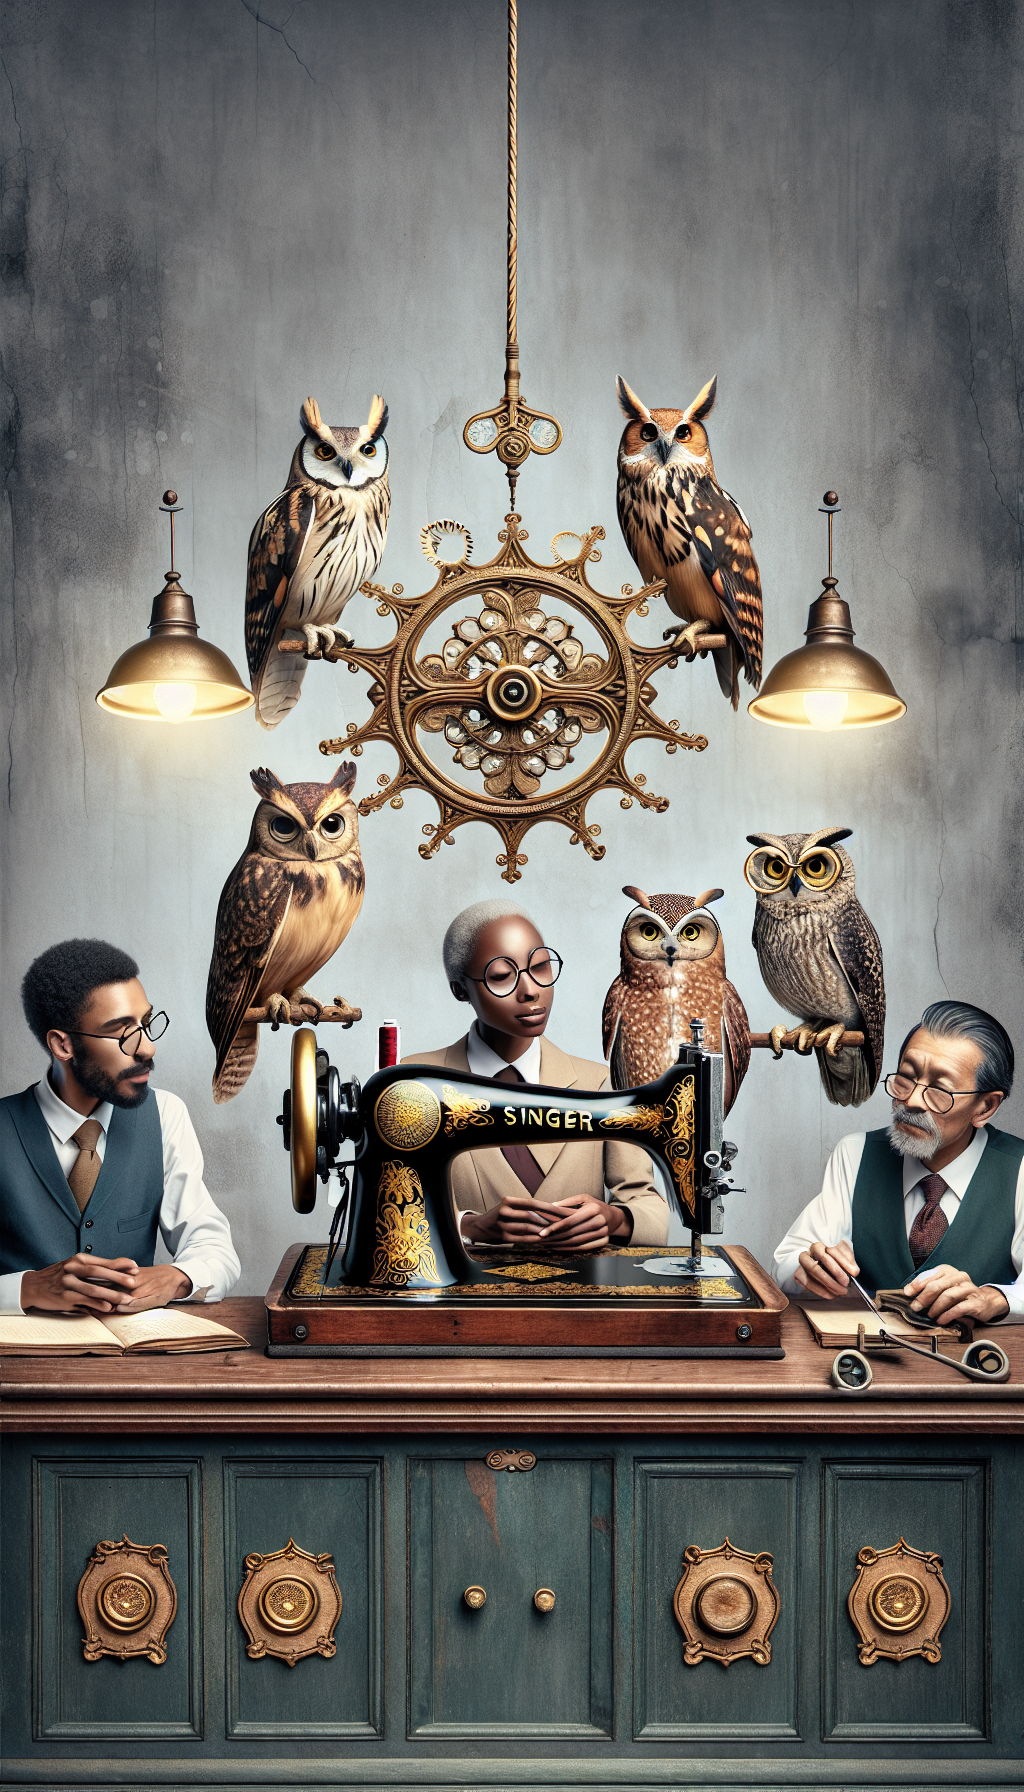 An illustration of an elegantly aged antique Singer sewing machine table, with its intricate details and golden filigree, artfully serves as the centerpiece. Around it, a trio of wise owls sporting eyeglasses and measuring tapes, to denote wisdom and precision, are perched on various parts of the table, each whispering valuation tips into the ears of curious collectors gathered around, eager to learn its worth.